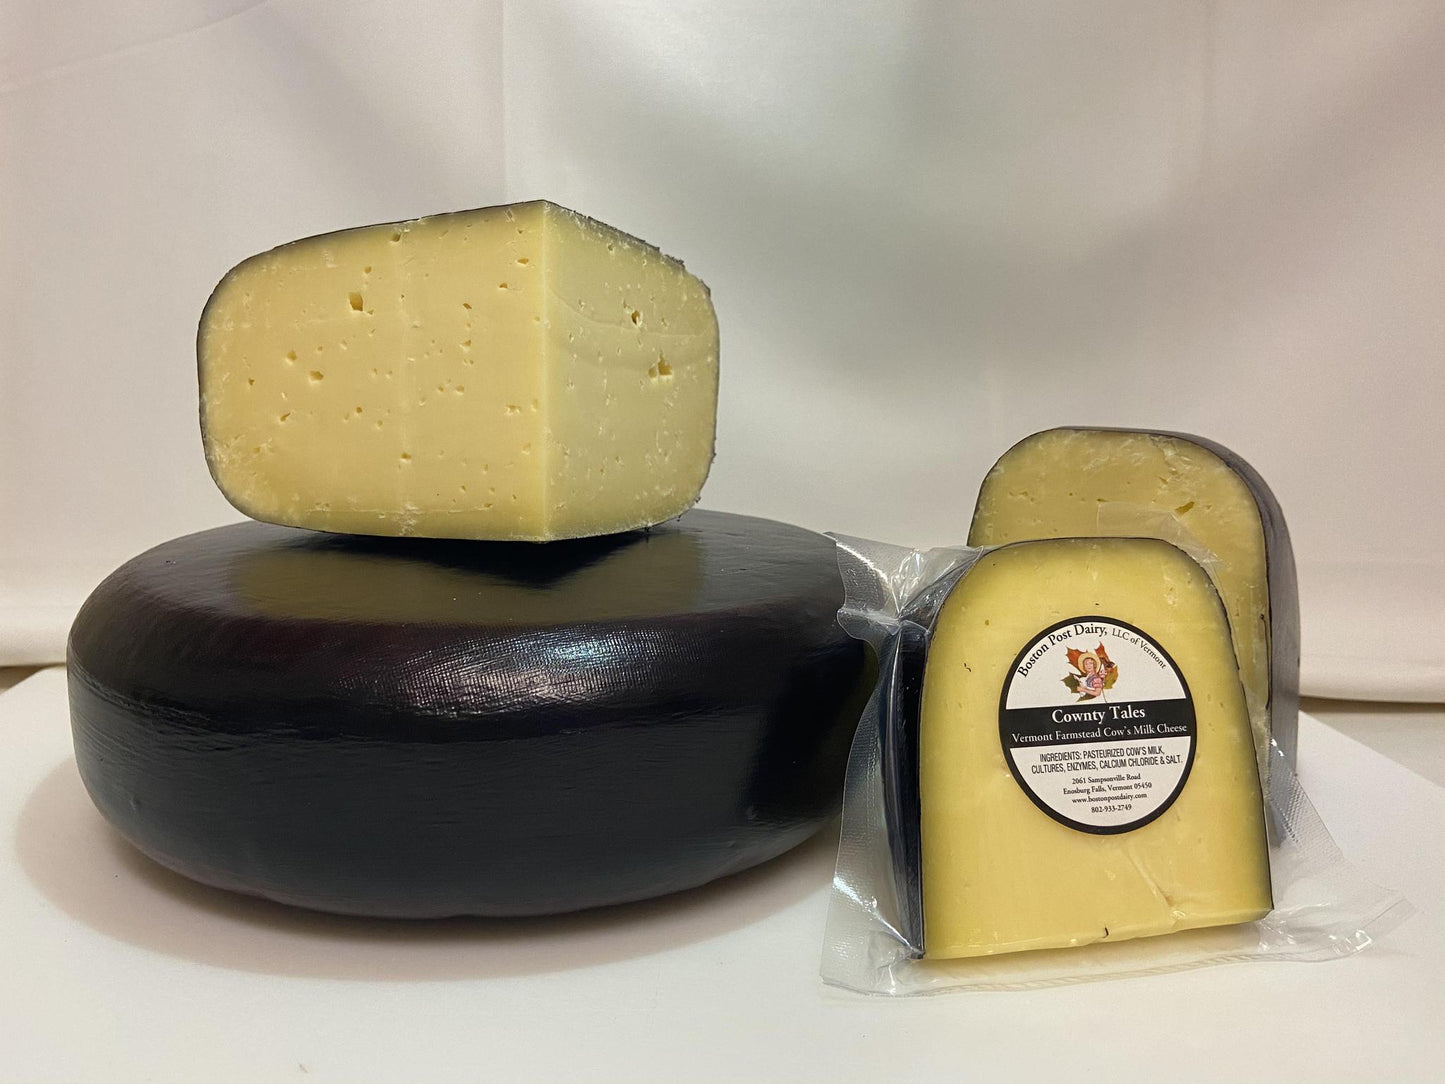 Cownty Tales Cheese 4 oz.